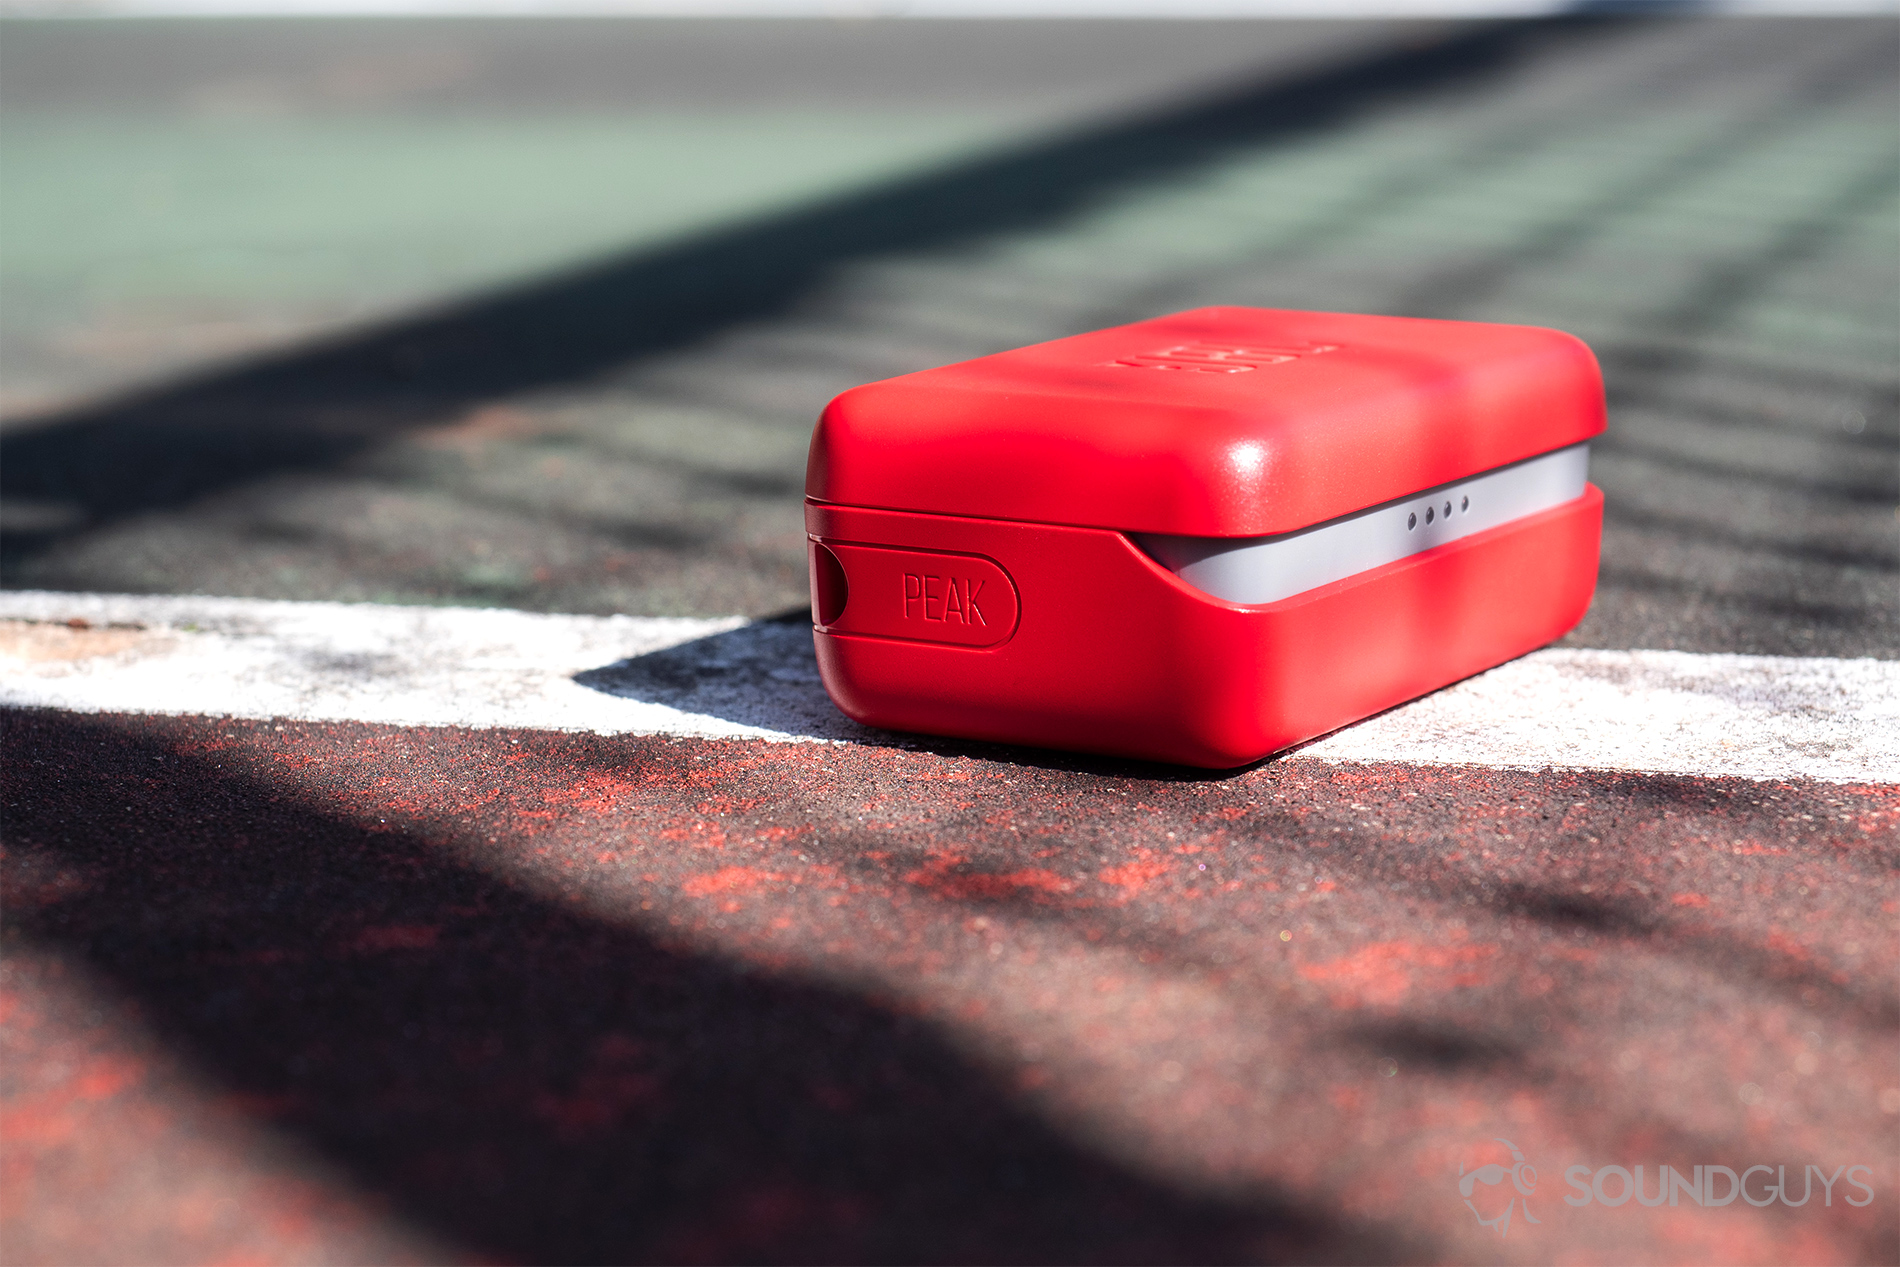 JBL Endurance Peak: The case angled away from the camera and resting on the boundary lines of a tennis court.